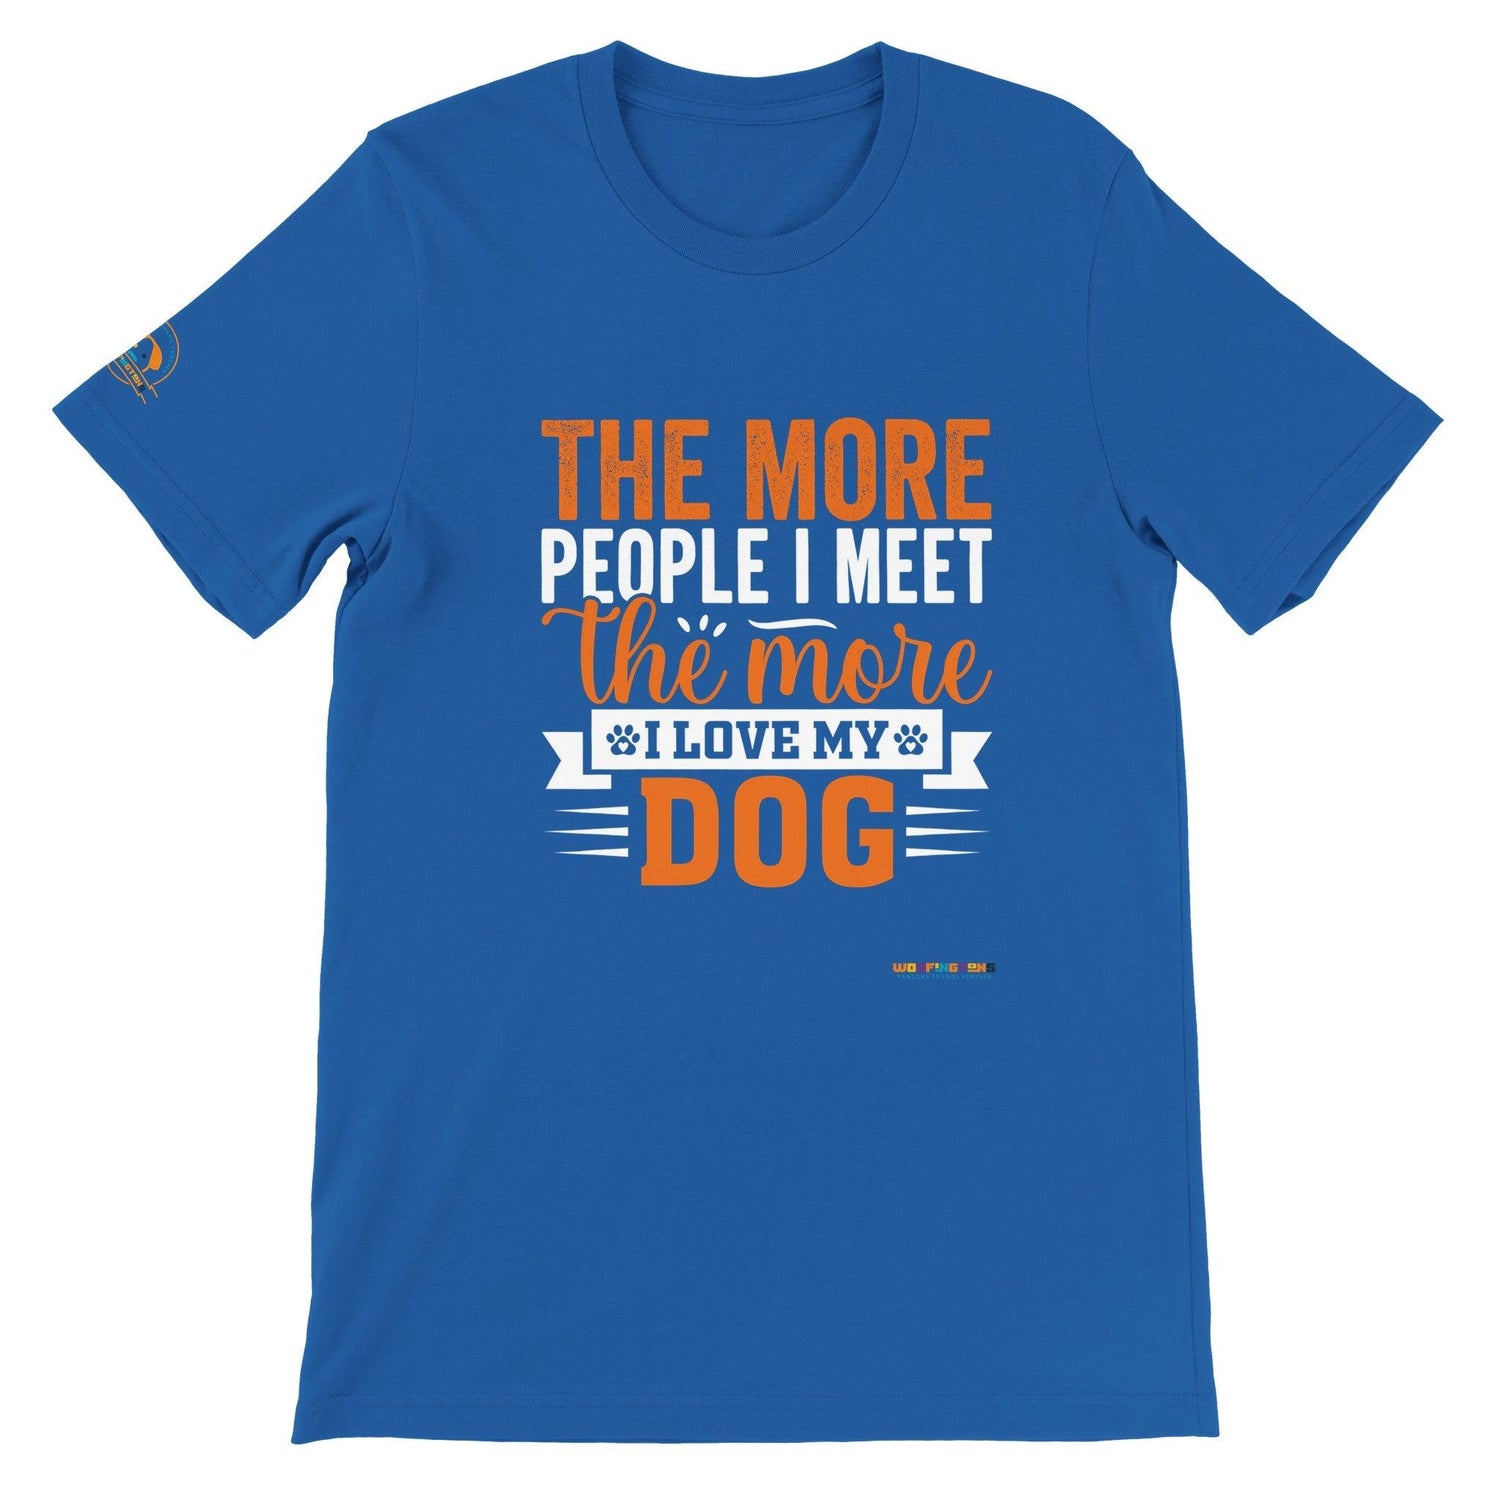 The More People I Meet The More I Love My Dog T-shirt - Woofingtons